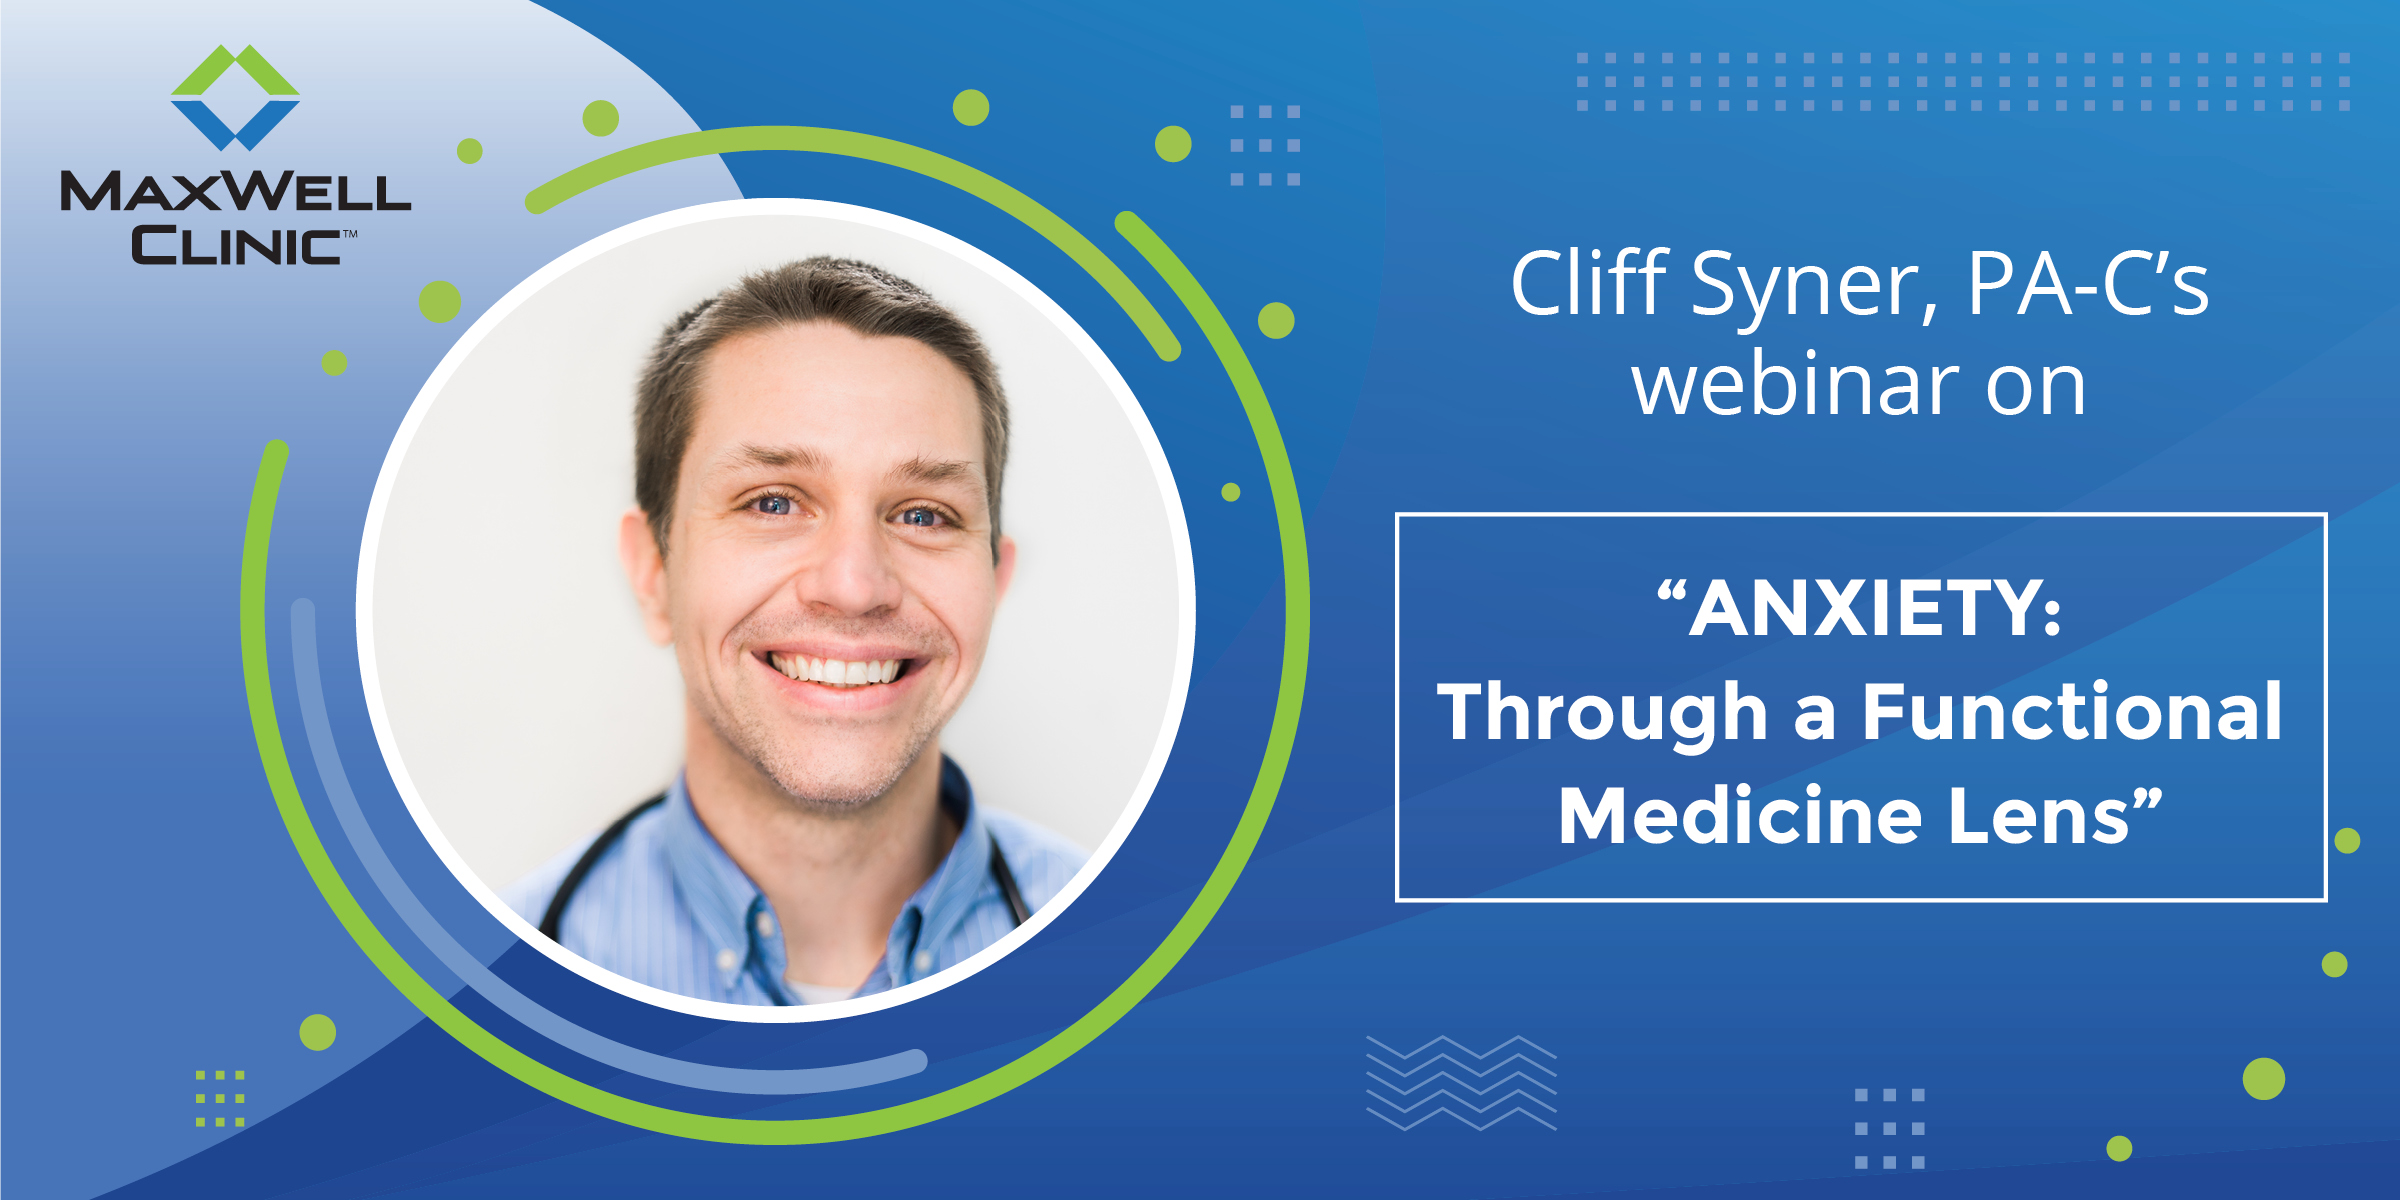 Anxiety: Through a Functional Medicine Lens with Cliff Syner, PA-C